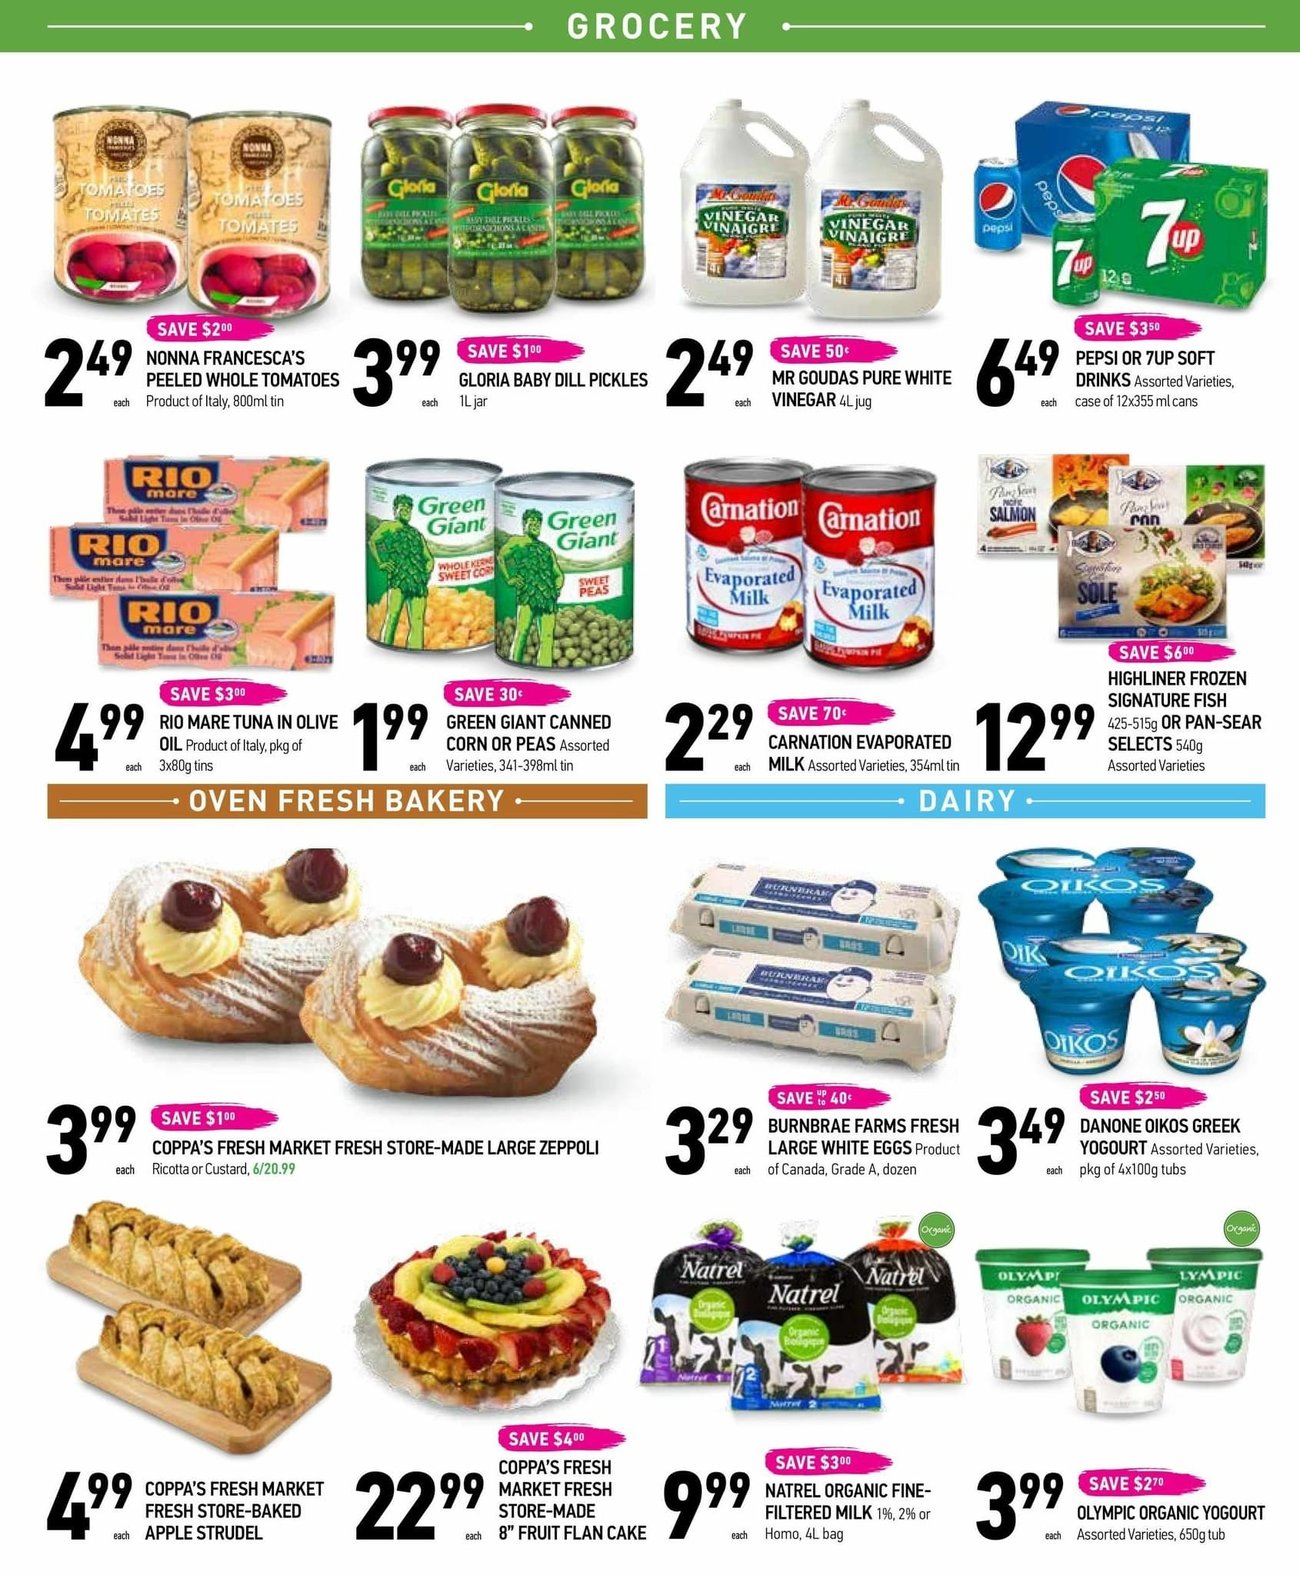 Coppa's Fresh Market - Weekly Flyer Specials - Page 3